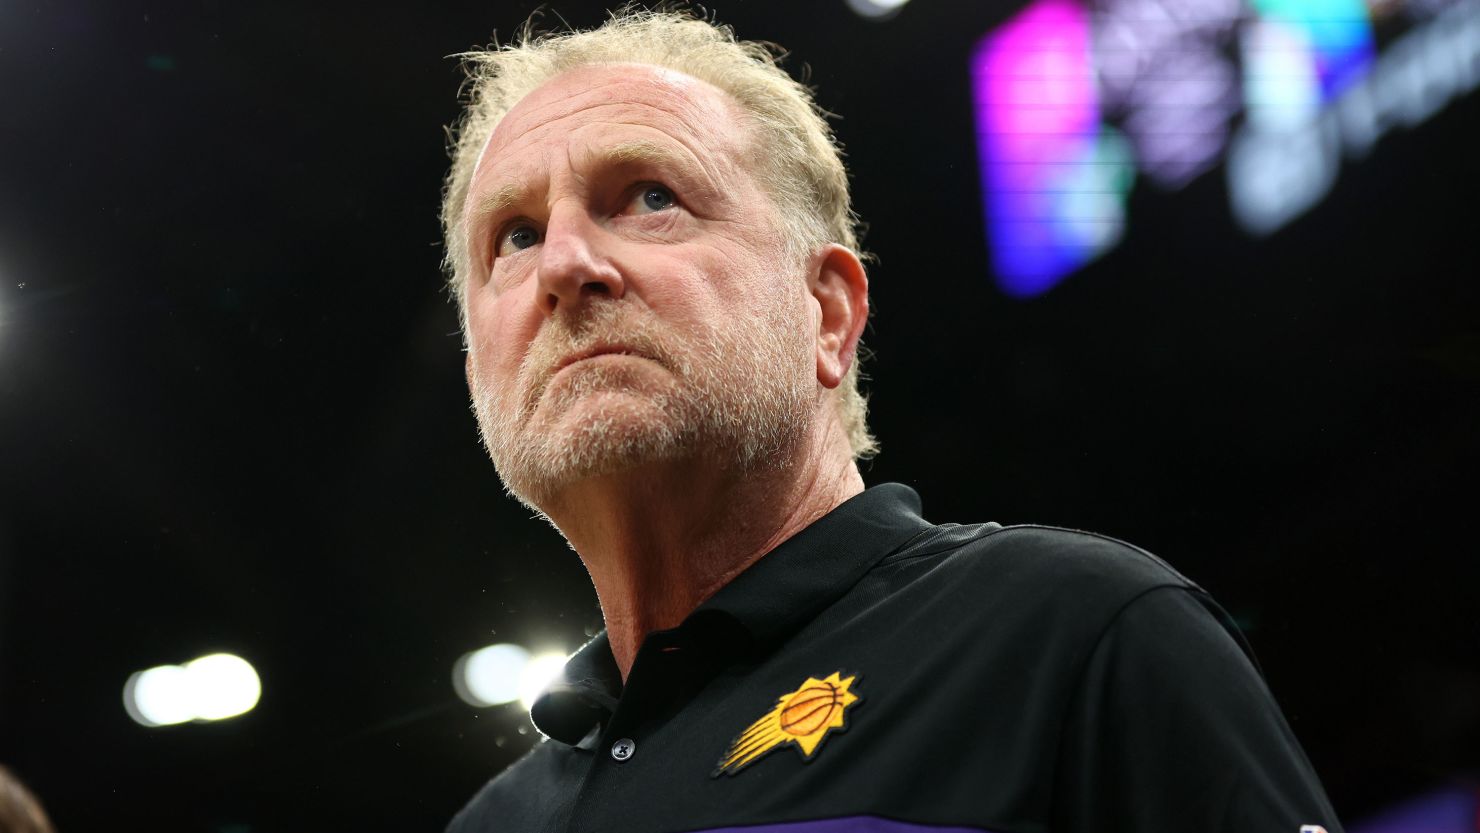 Phoenix Suns players and staff reacted to the report into Robert Sarver at NBA media day.